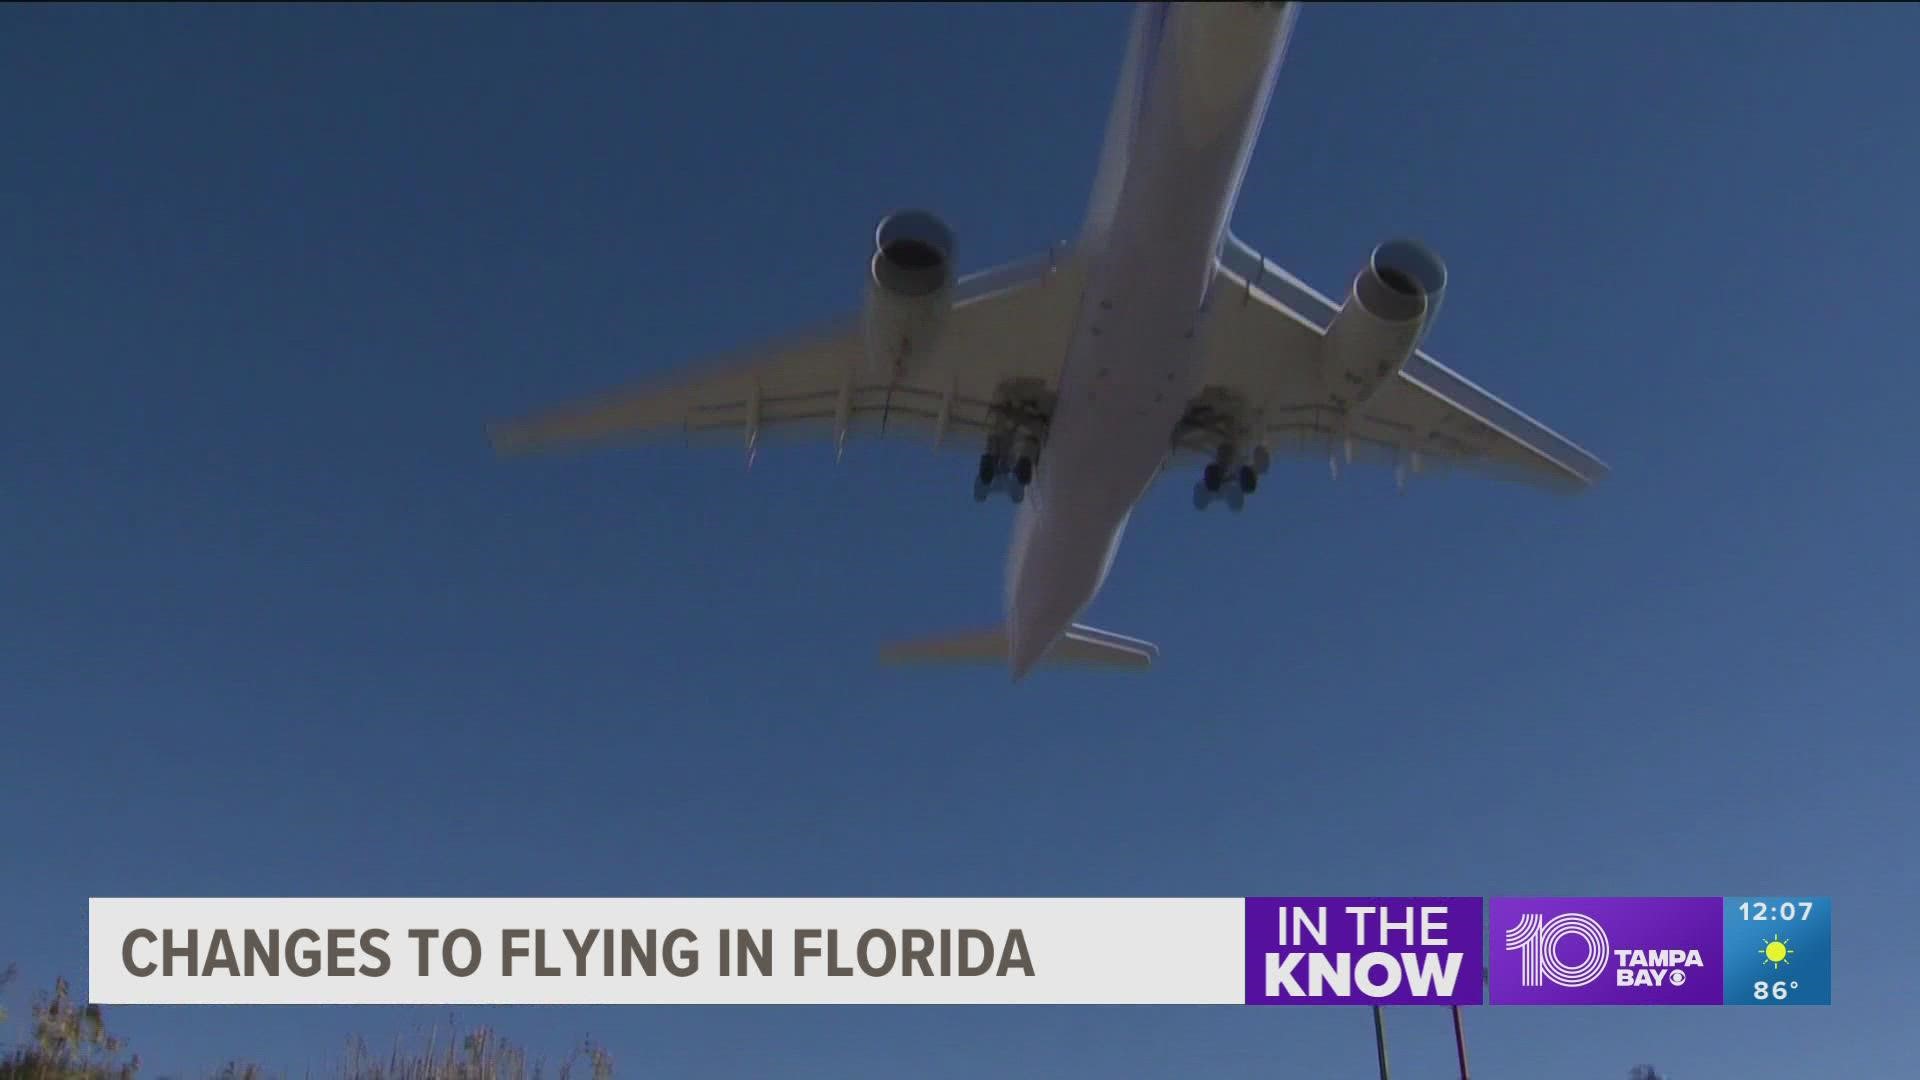 Air traffic to Florida picked up more quickly during the pandemic than many other places, and airlines have scheduled even more flights for this summer.